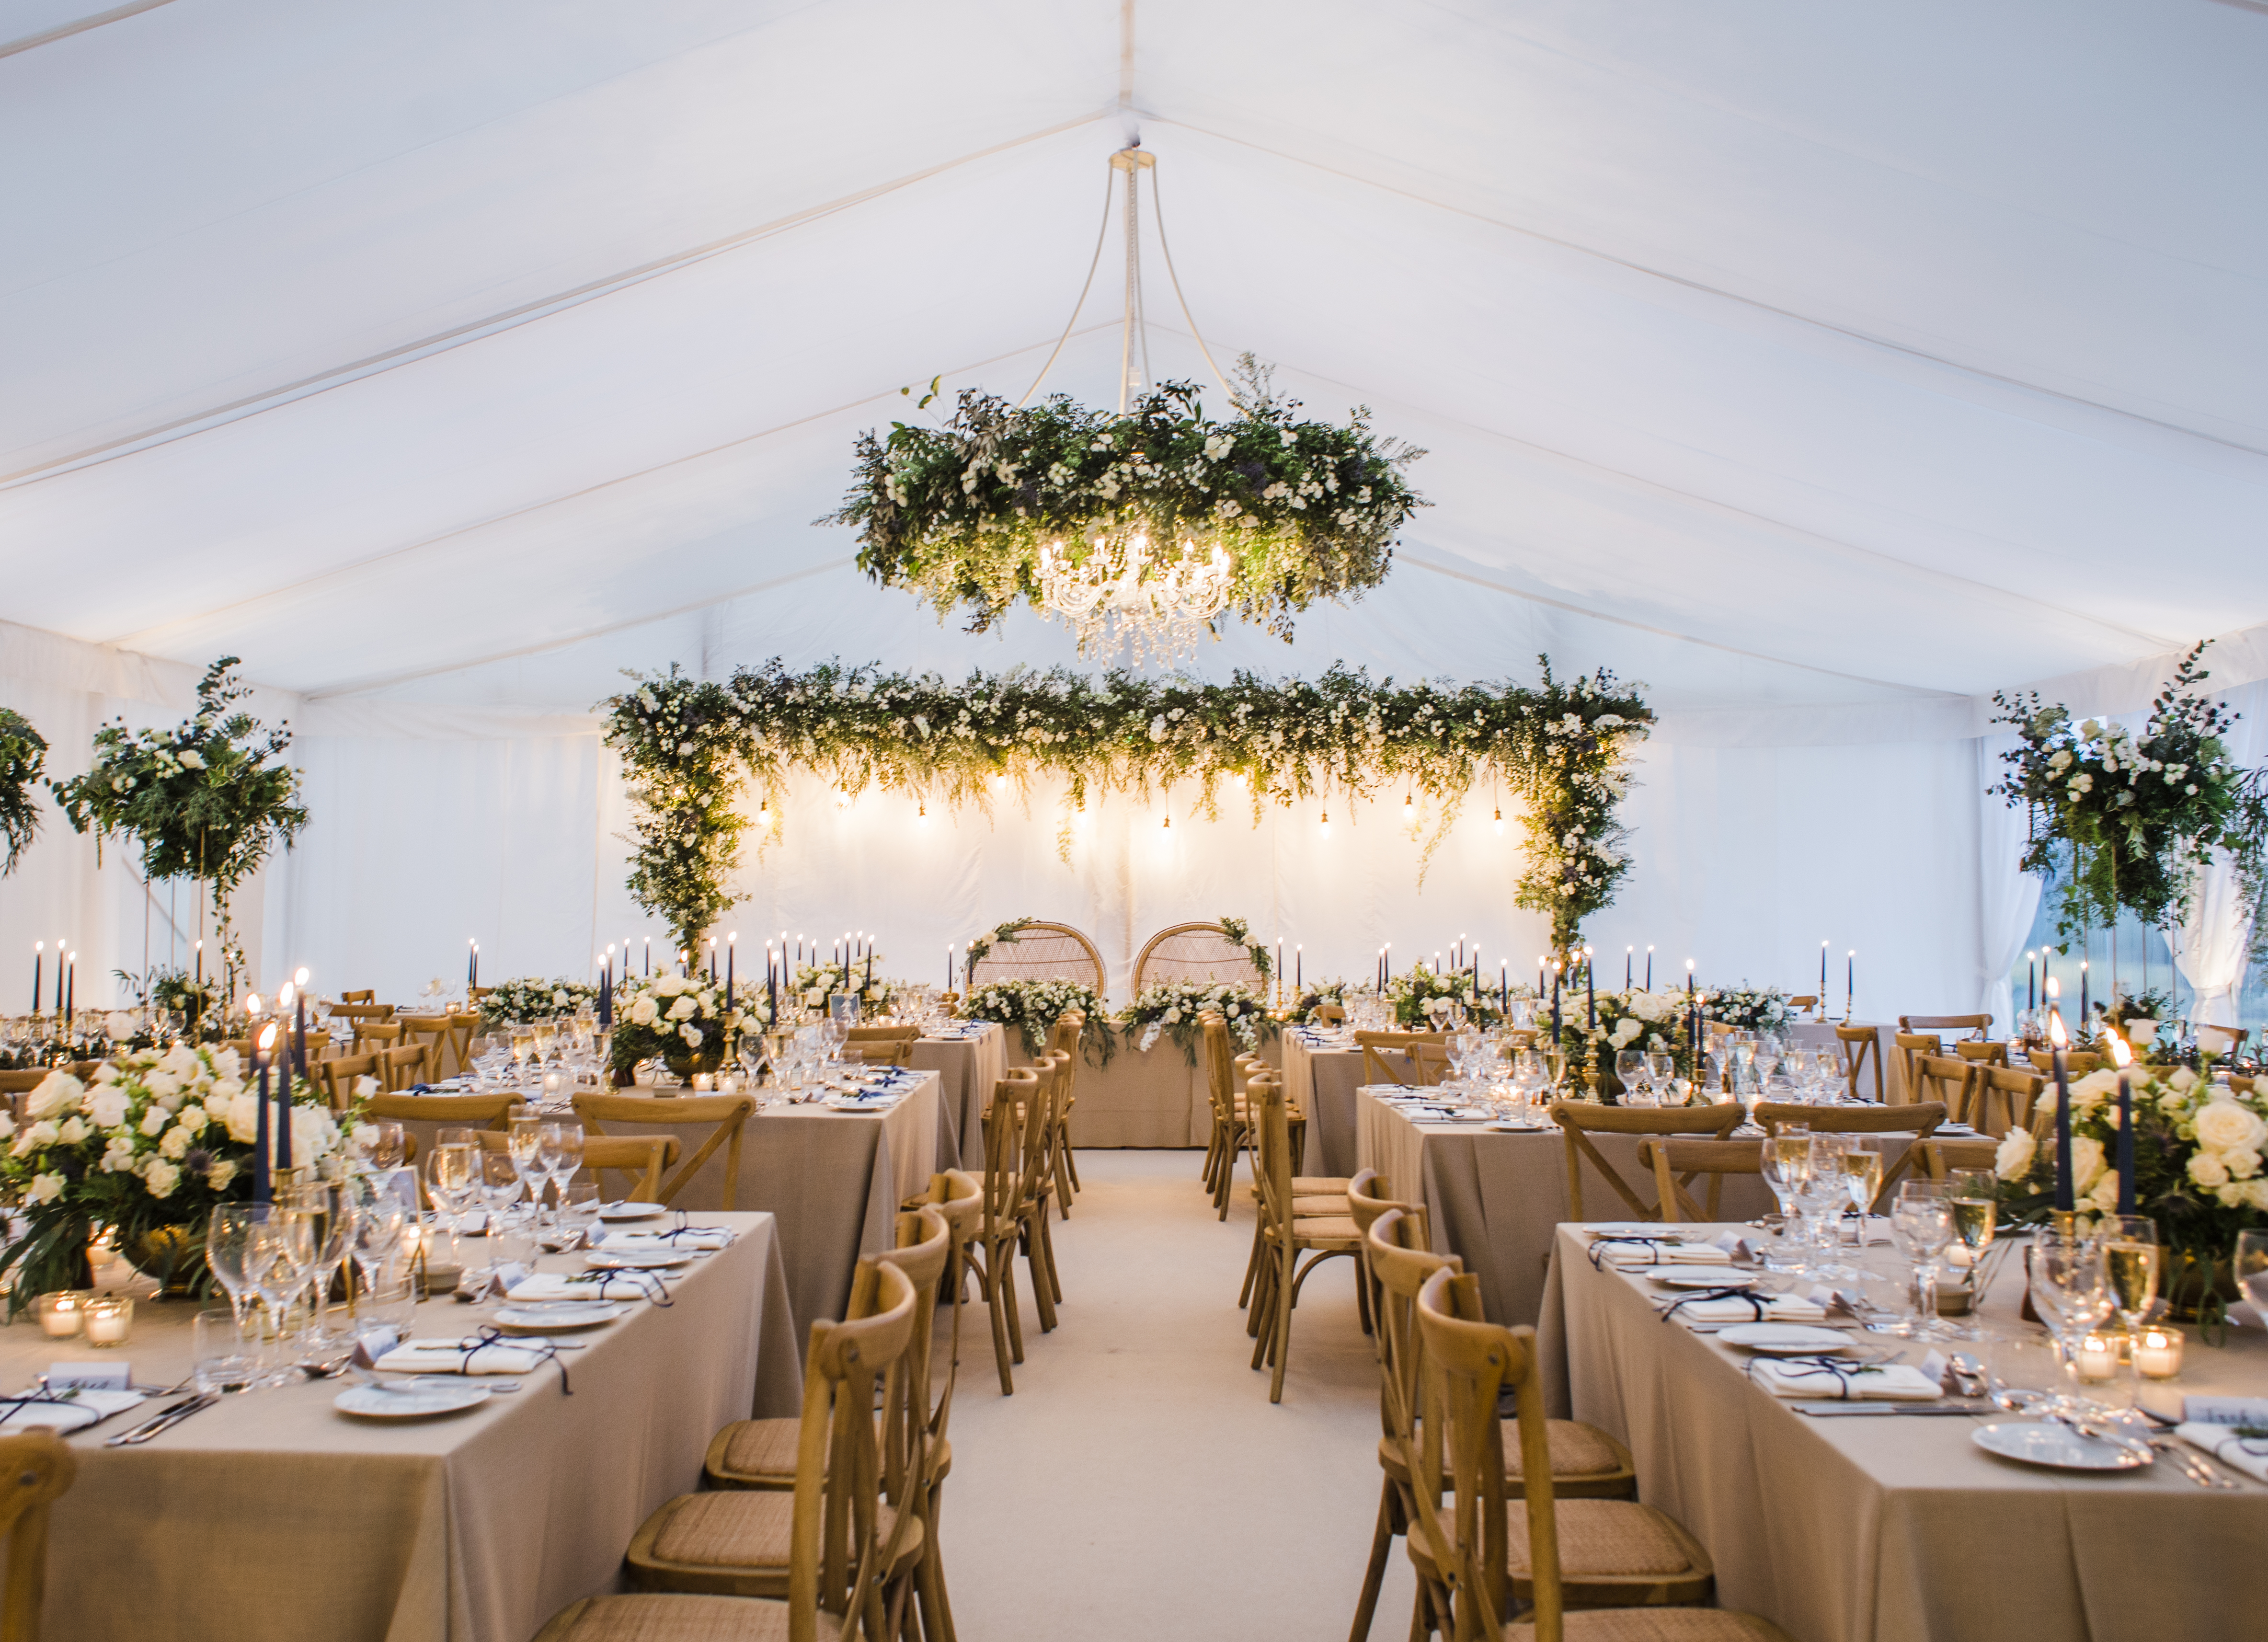 Where Should I Have My Marquee Wedding